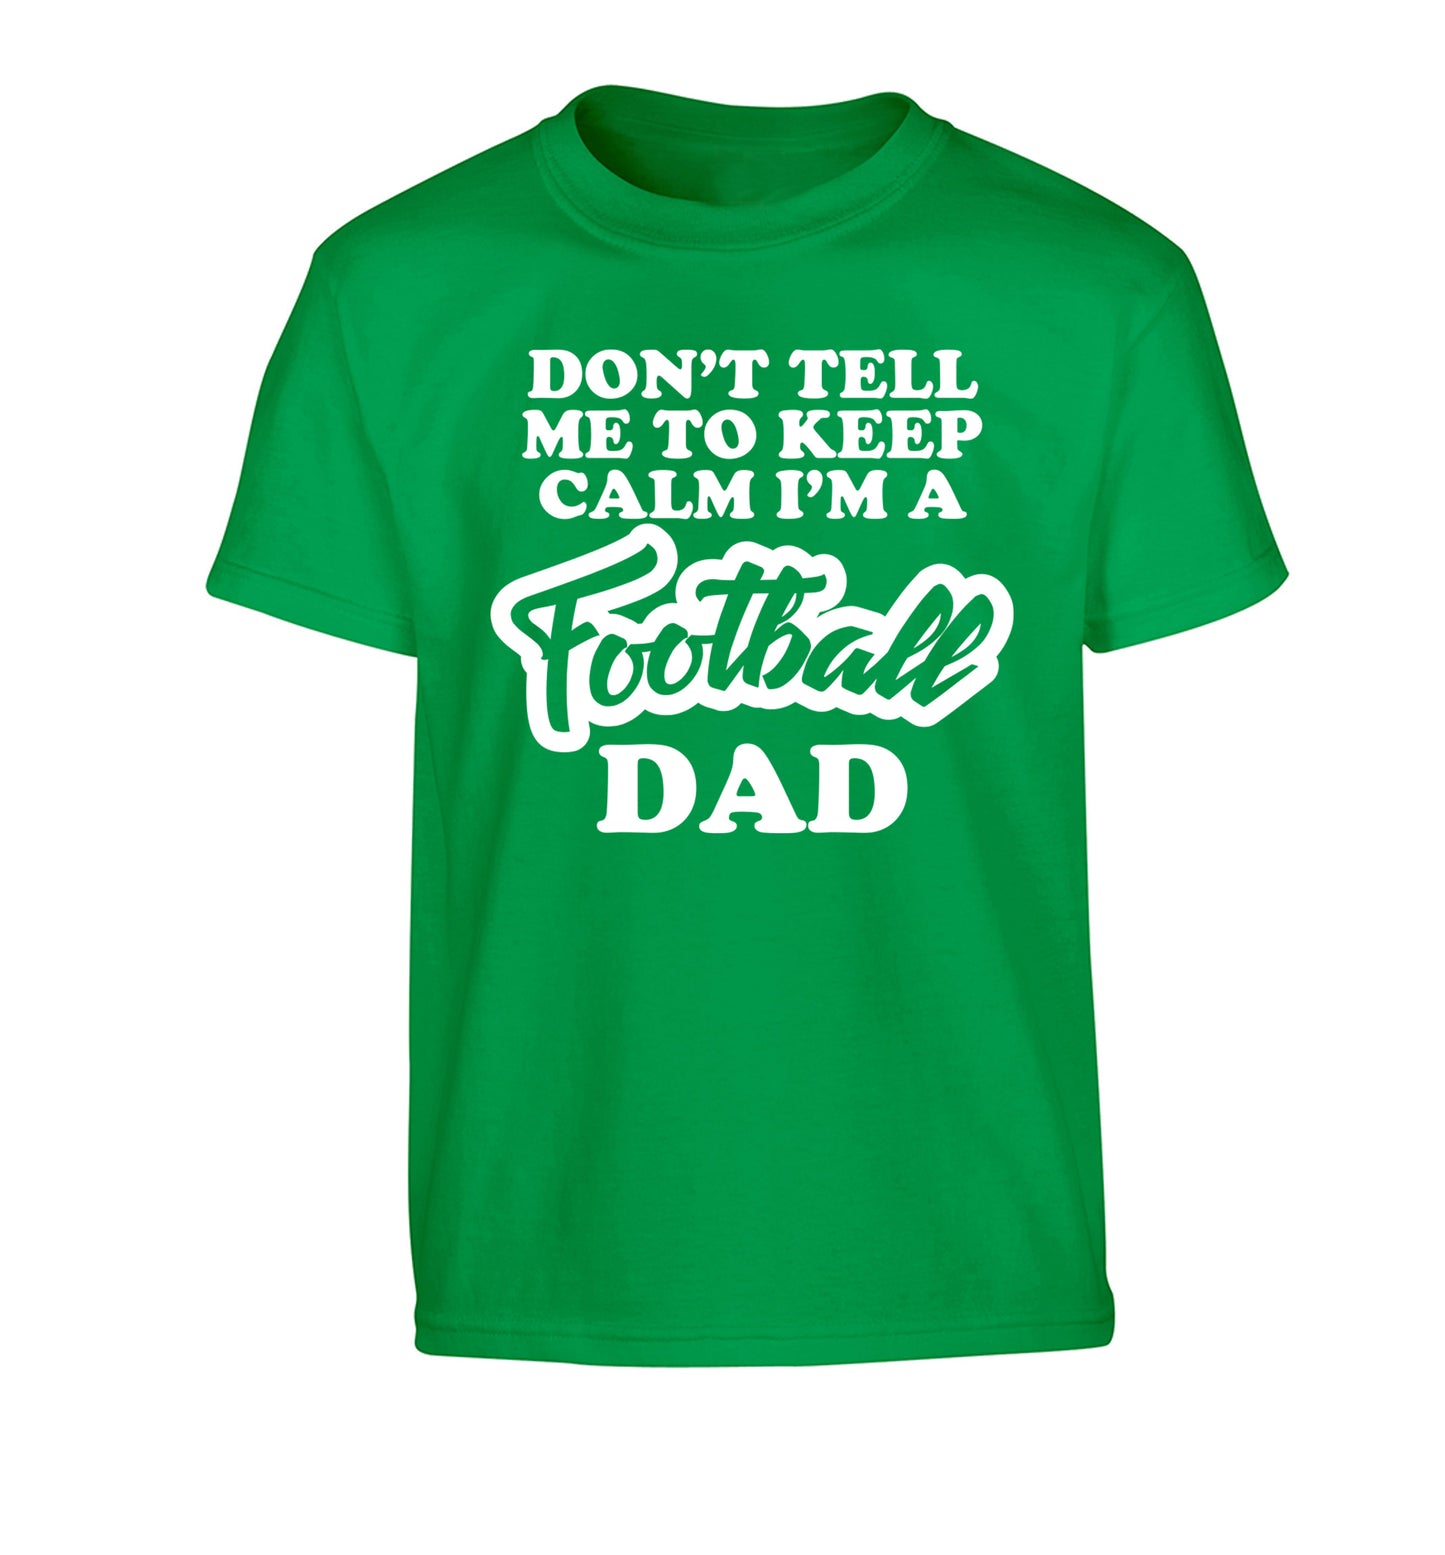 Don't tell me to keep calm I'm a football dad Children's green Tshirt 12-14 Years